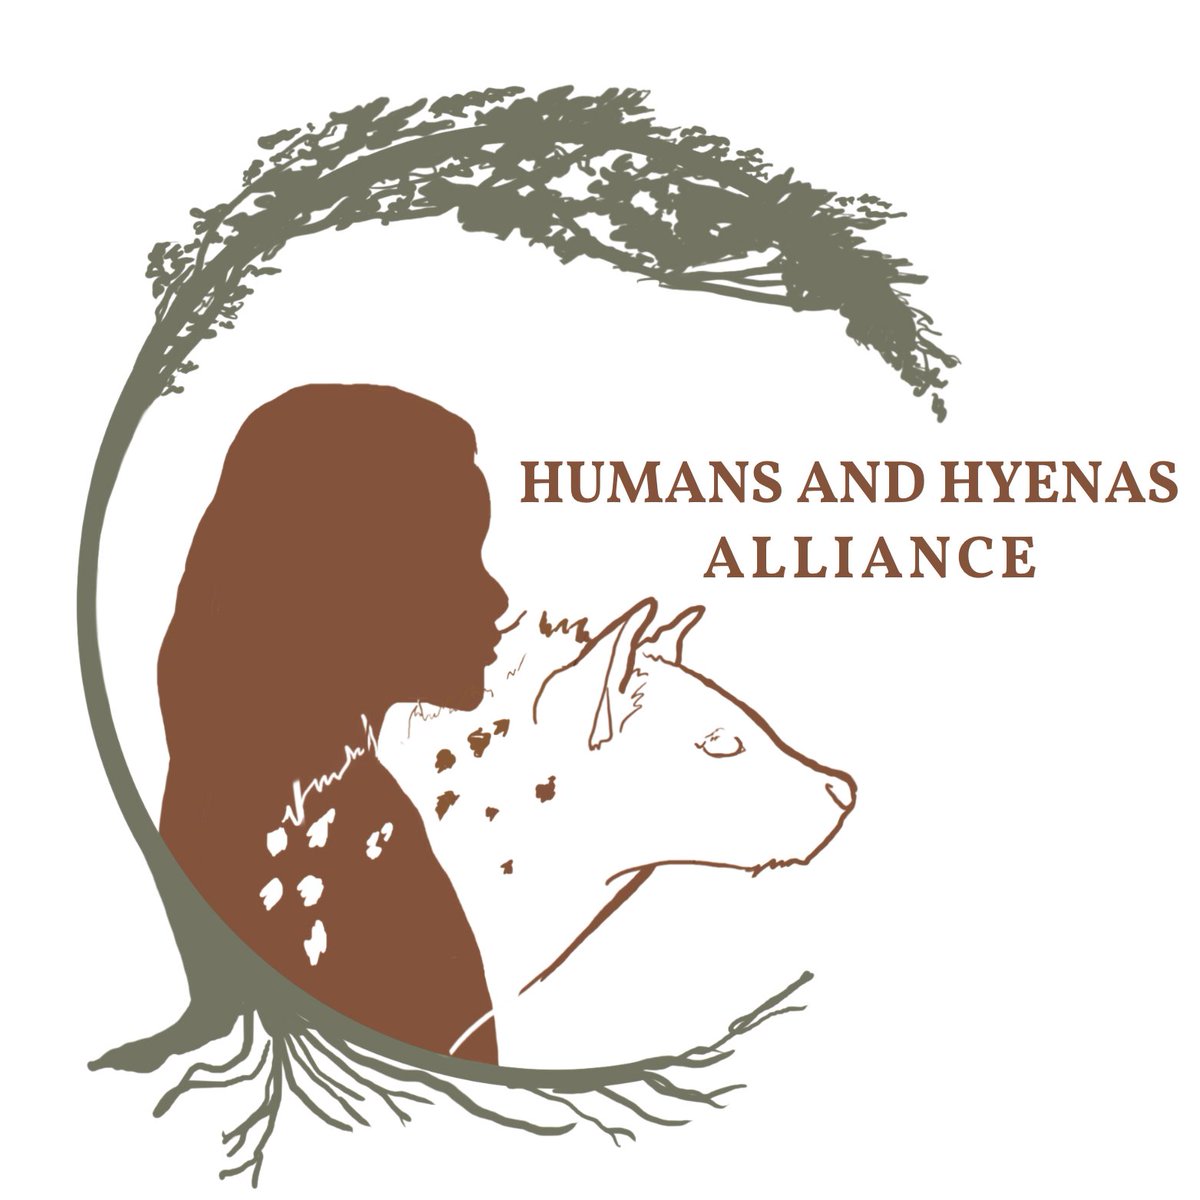 The Humans and Hyenas Alliance is excited to unveil our new logo, designed by a fellow @NatGeo Explorer & scientific illustrator, @laureneeckert w/input from many colleagues around the world. Great timing to boost our fundraiser for a new vehicle! gofund.me/b0810019